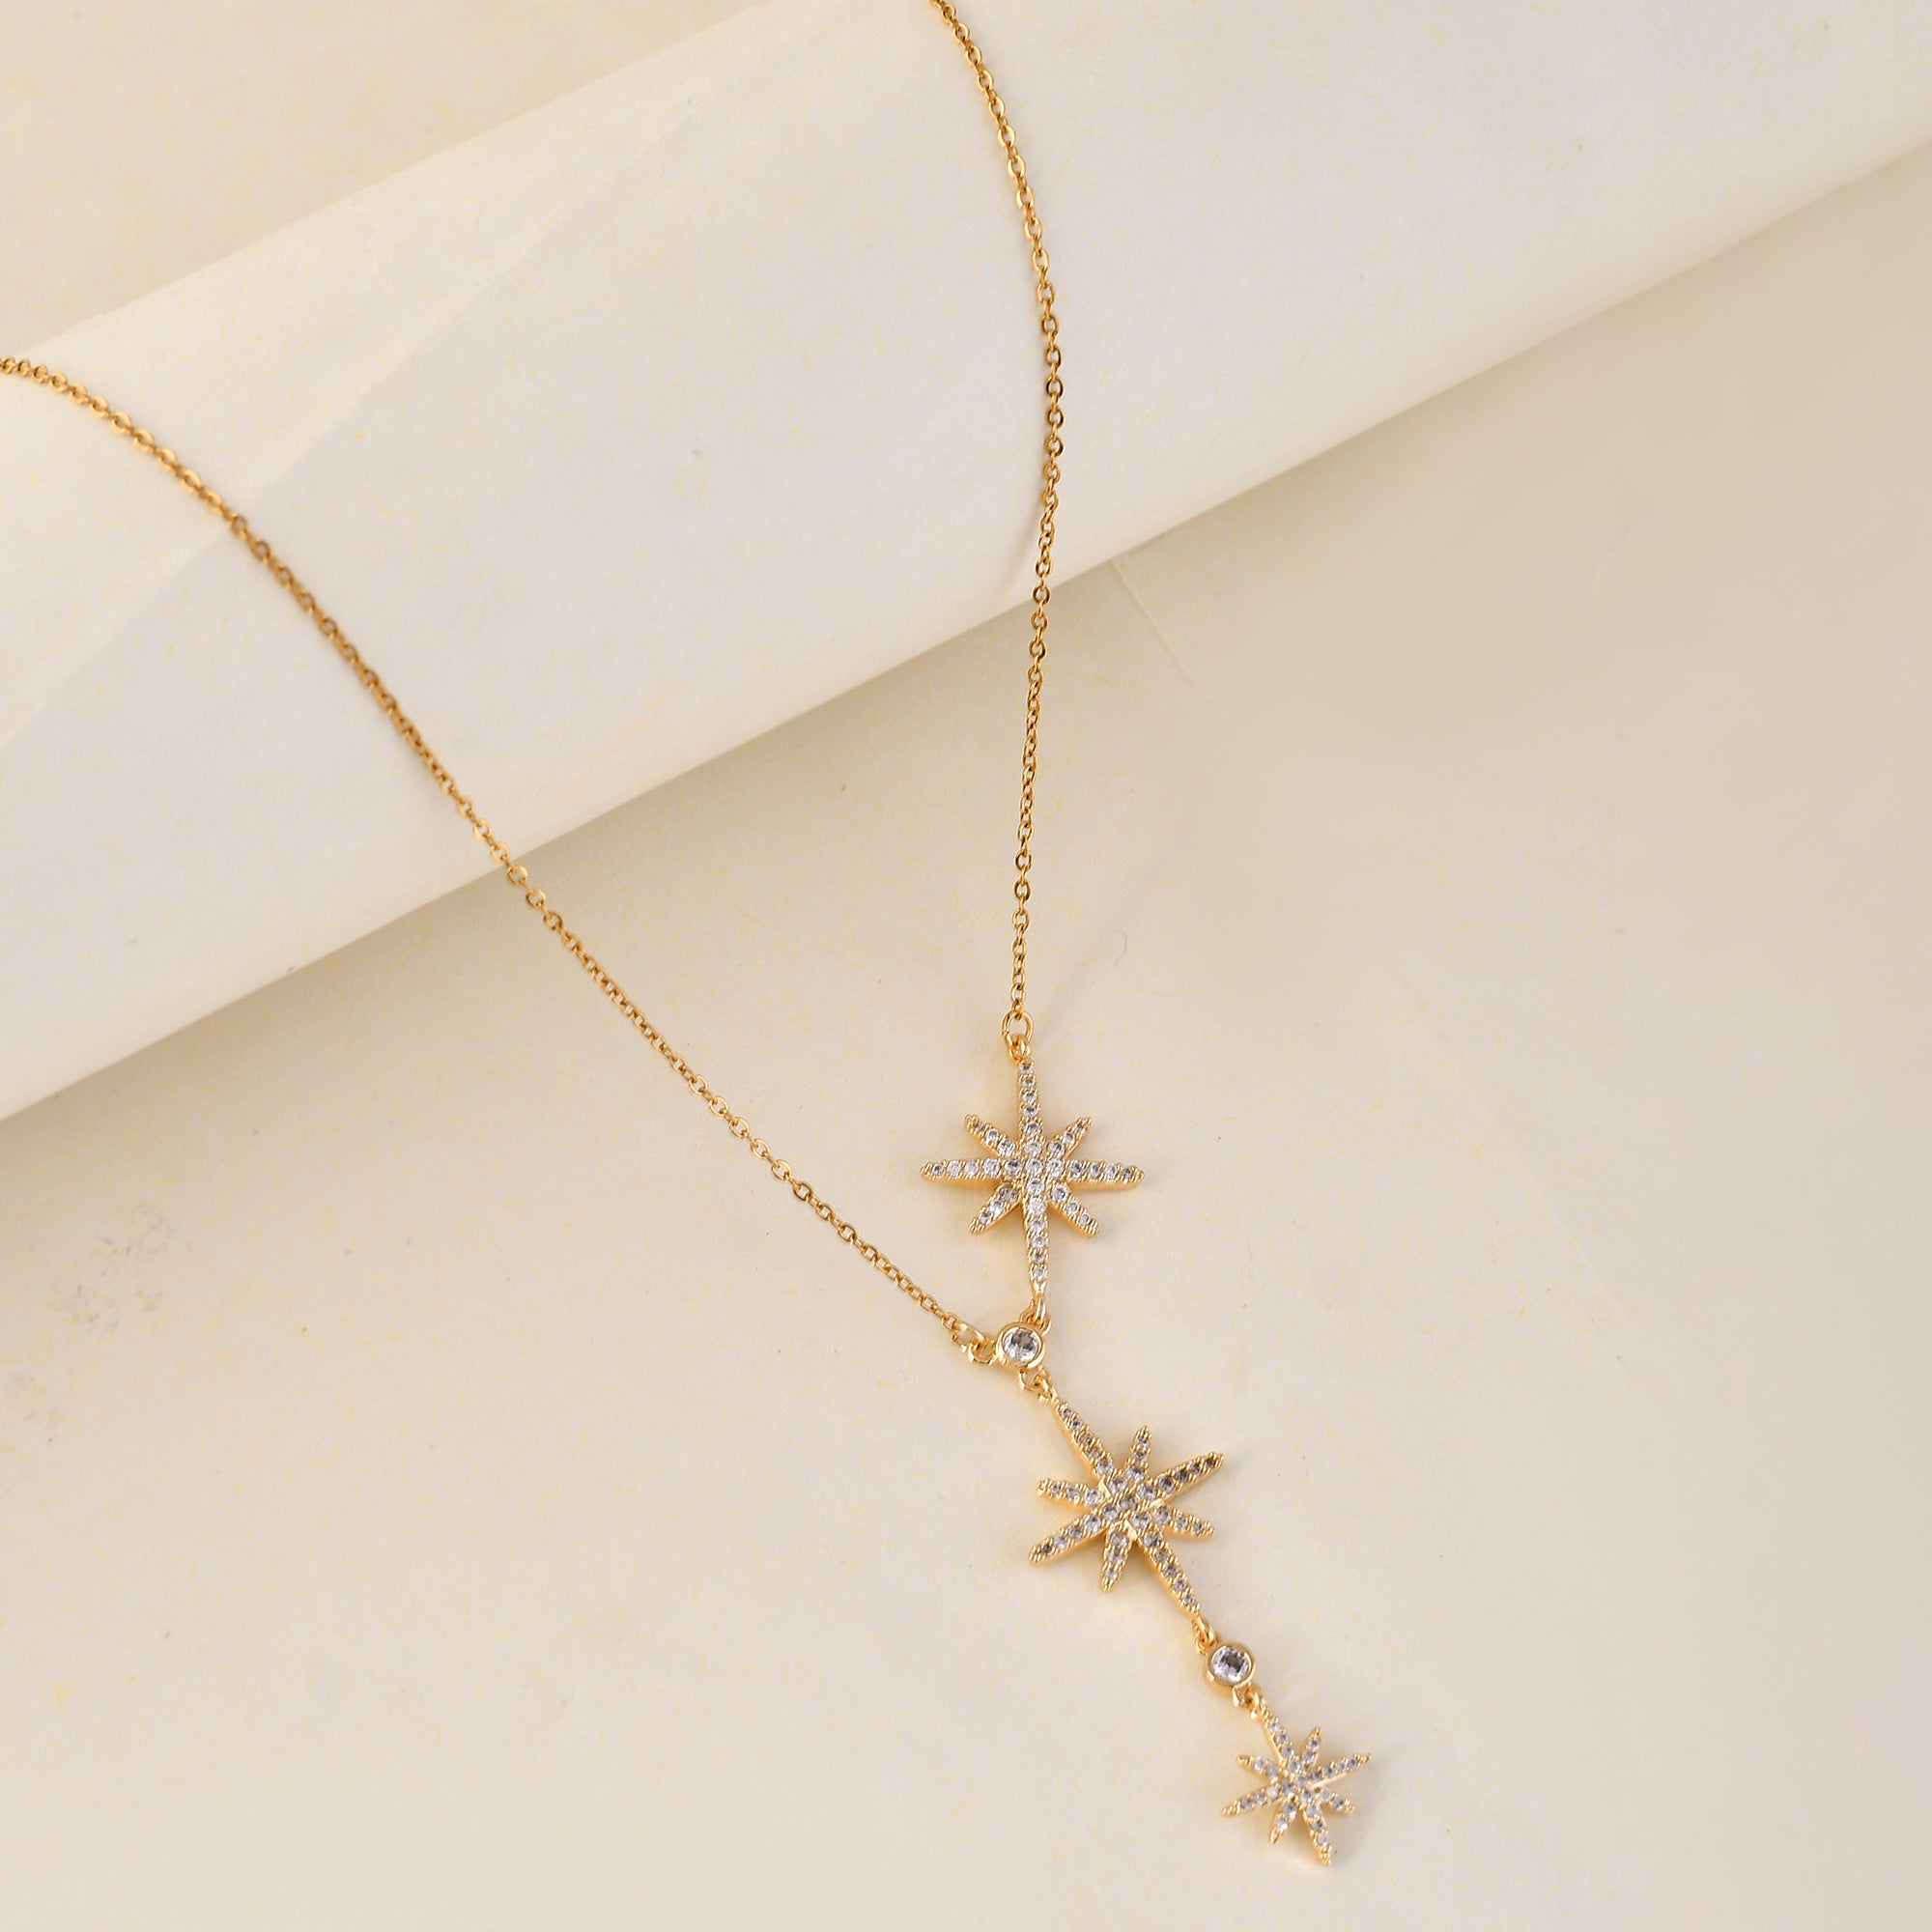 3 Celestial Gold Charm Necklace